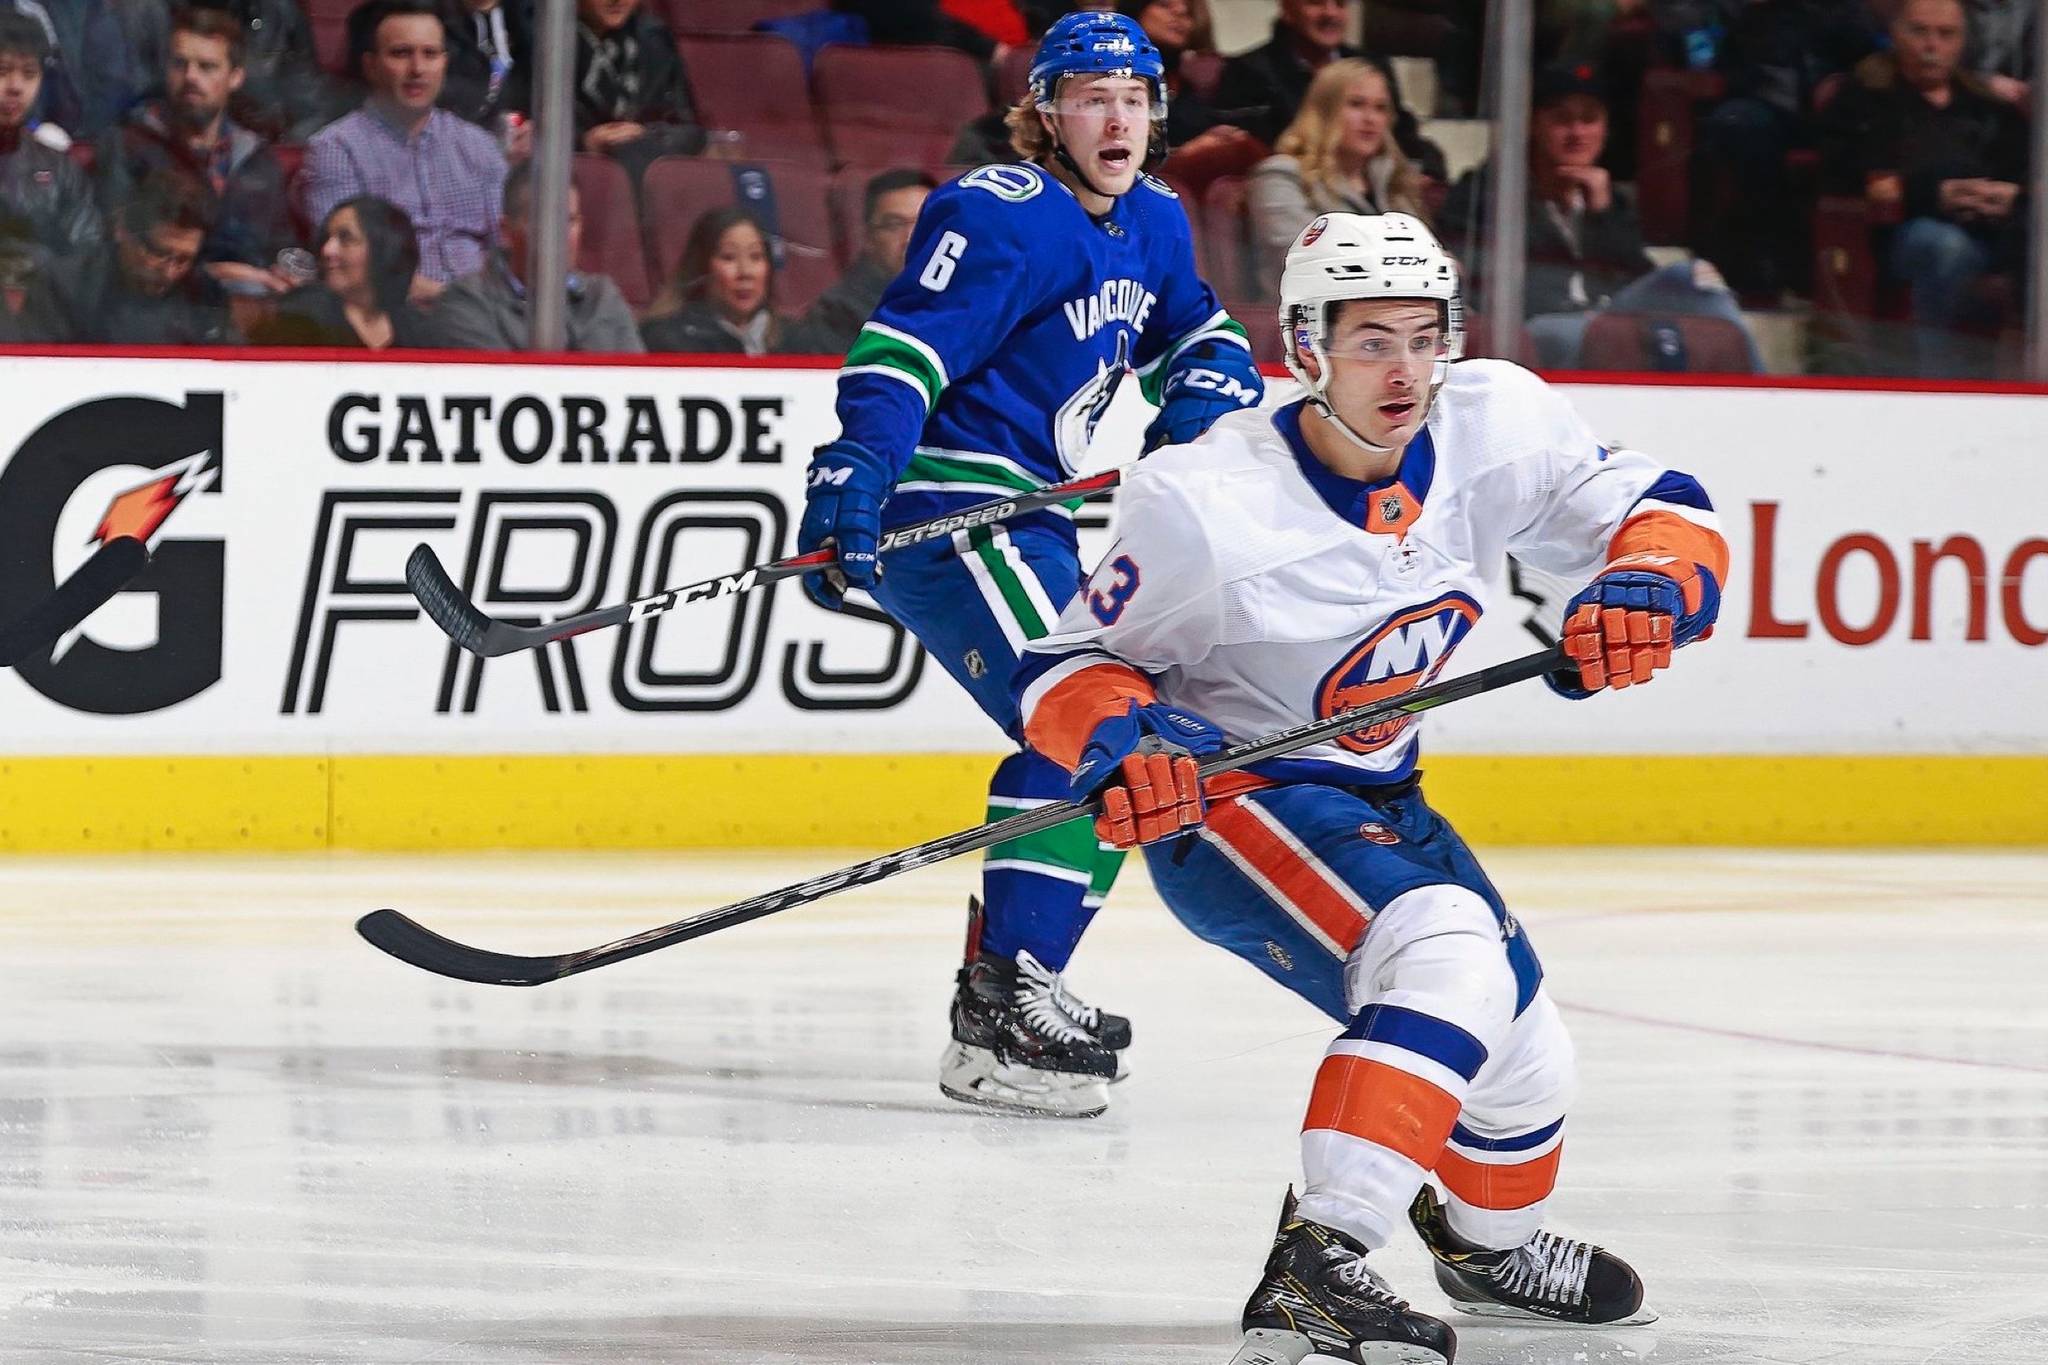 Islanders acquire Bo Horvat in trade with Canucks - Kelowna Capital News